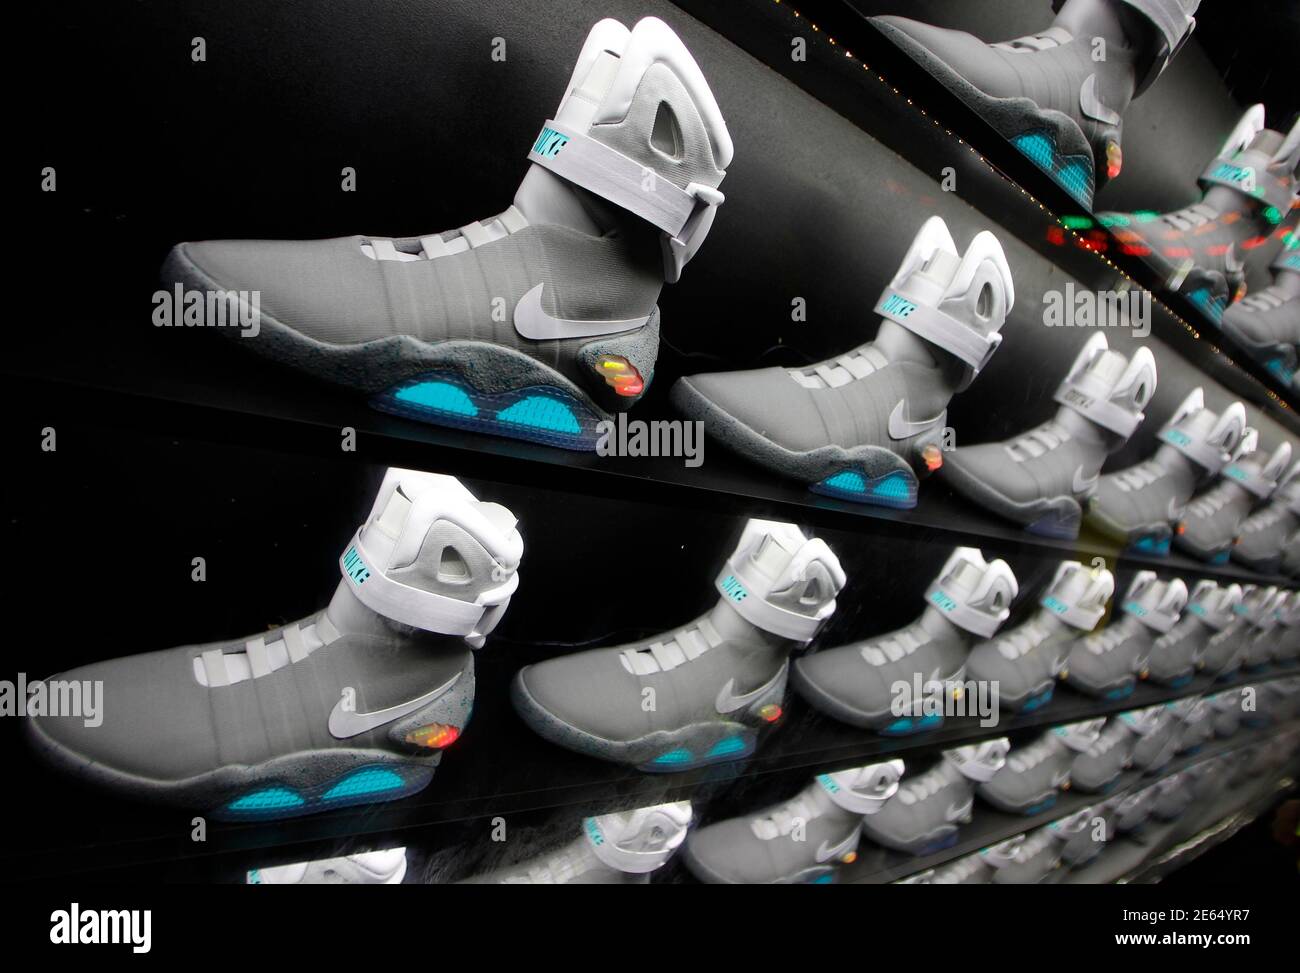 2011 NIKE MAG shoes, based on the original NIKE MAG worn in 2015 by the  "Back to the Future" character Marty McFly, played by Michael J. Fox, is  displayed during its unveiling